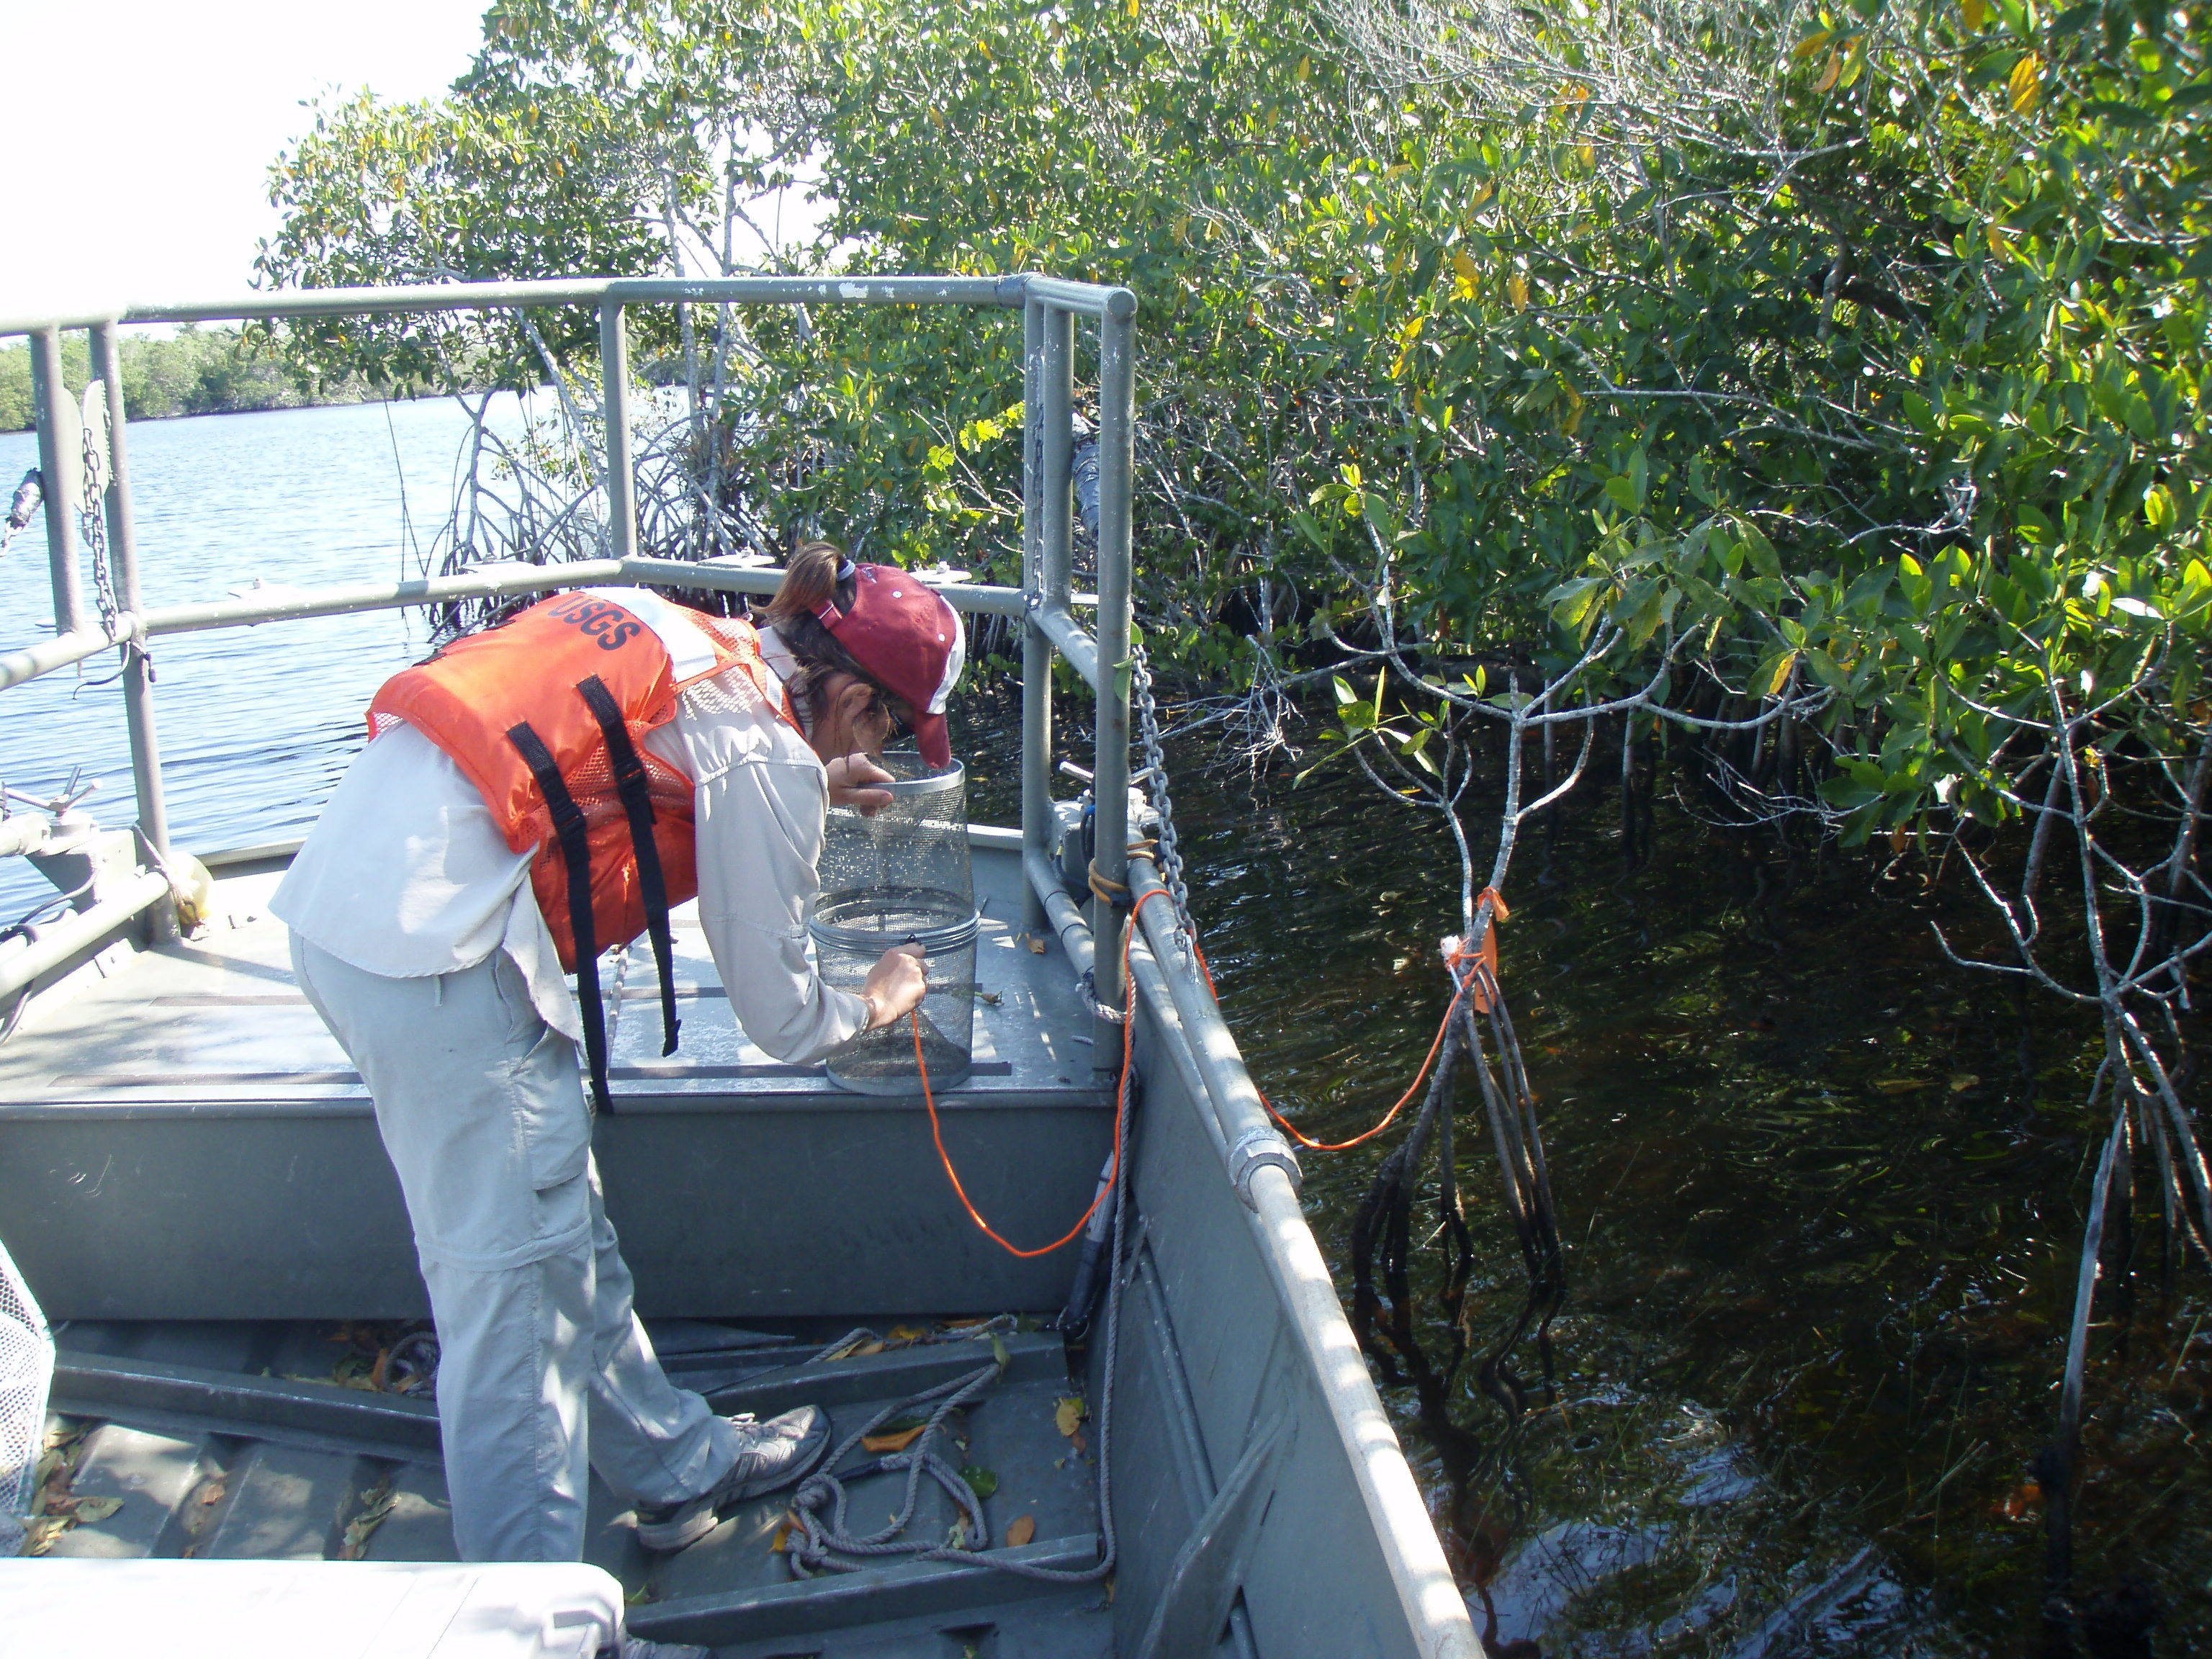 Lauren McCarthy setting a minnow trap in Rookery Branch